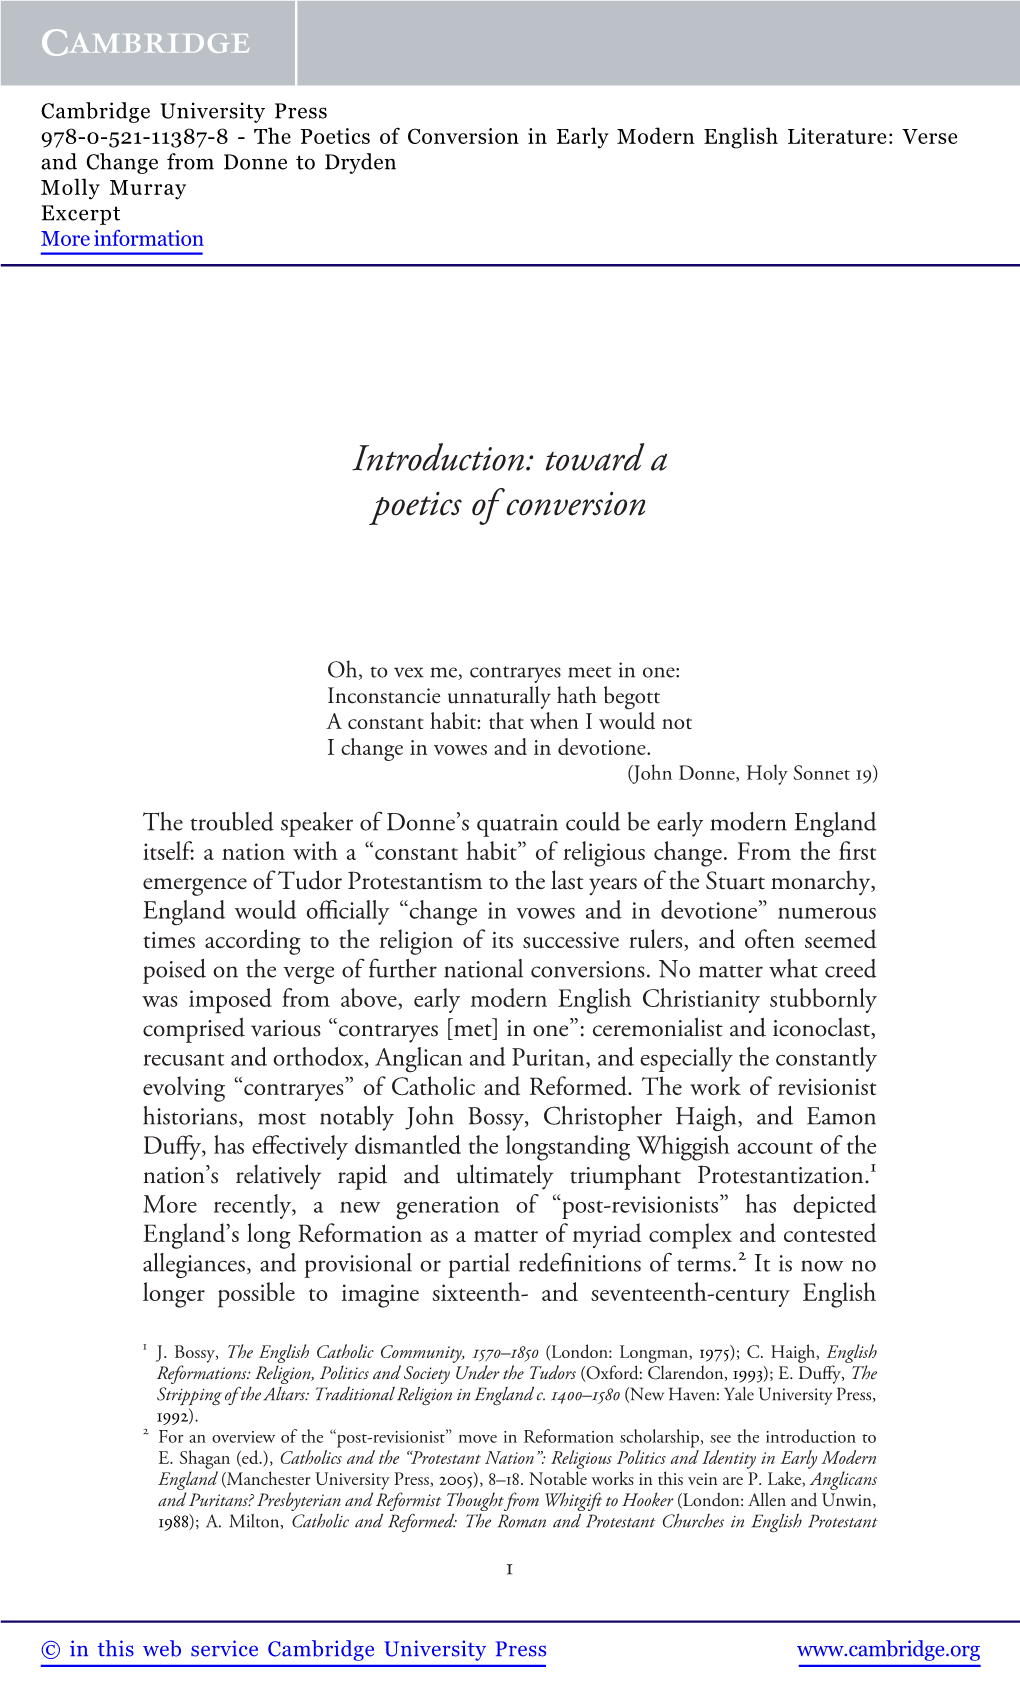 Introduction: Toward a Poetics of Conversion